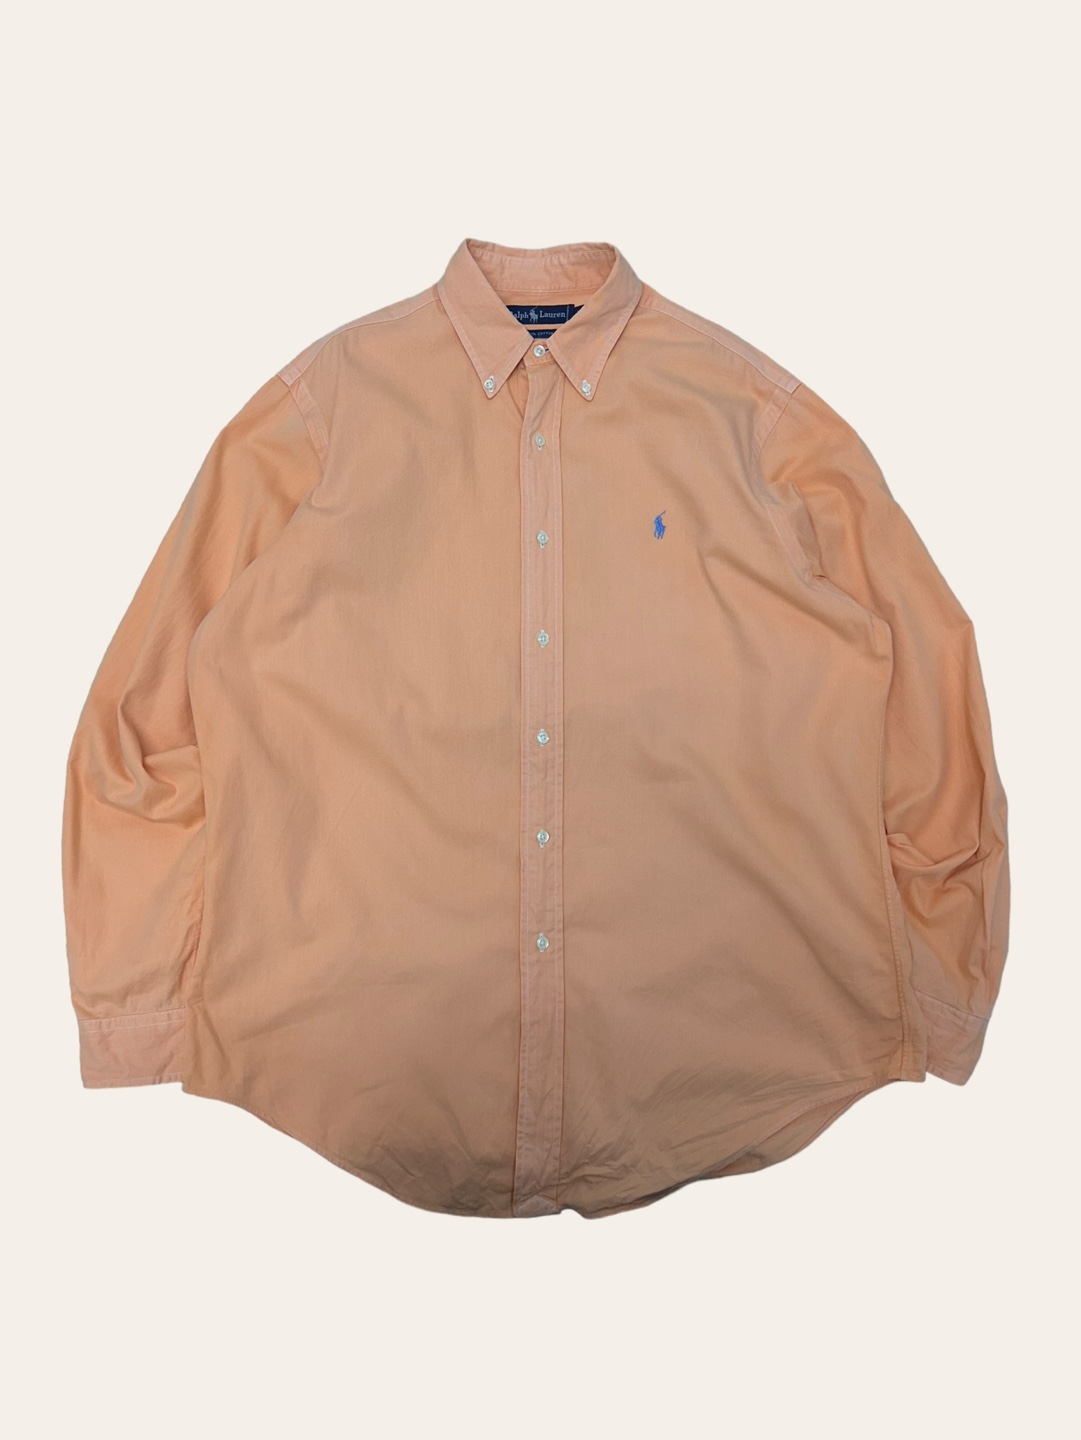 (From USA)Polo ralph lauren light peach color solid shirt L